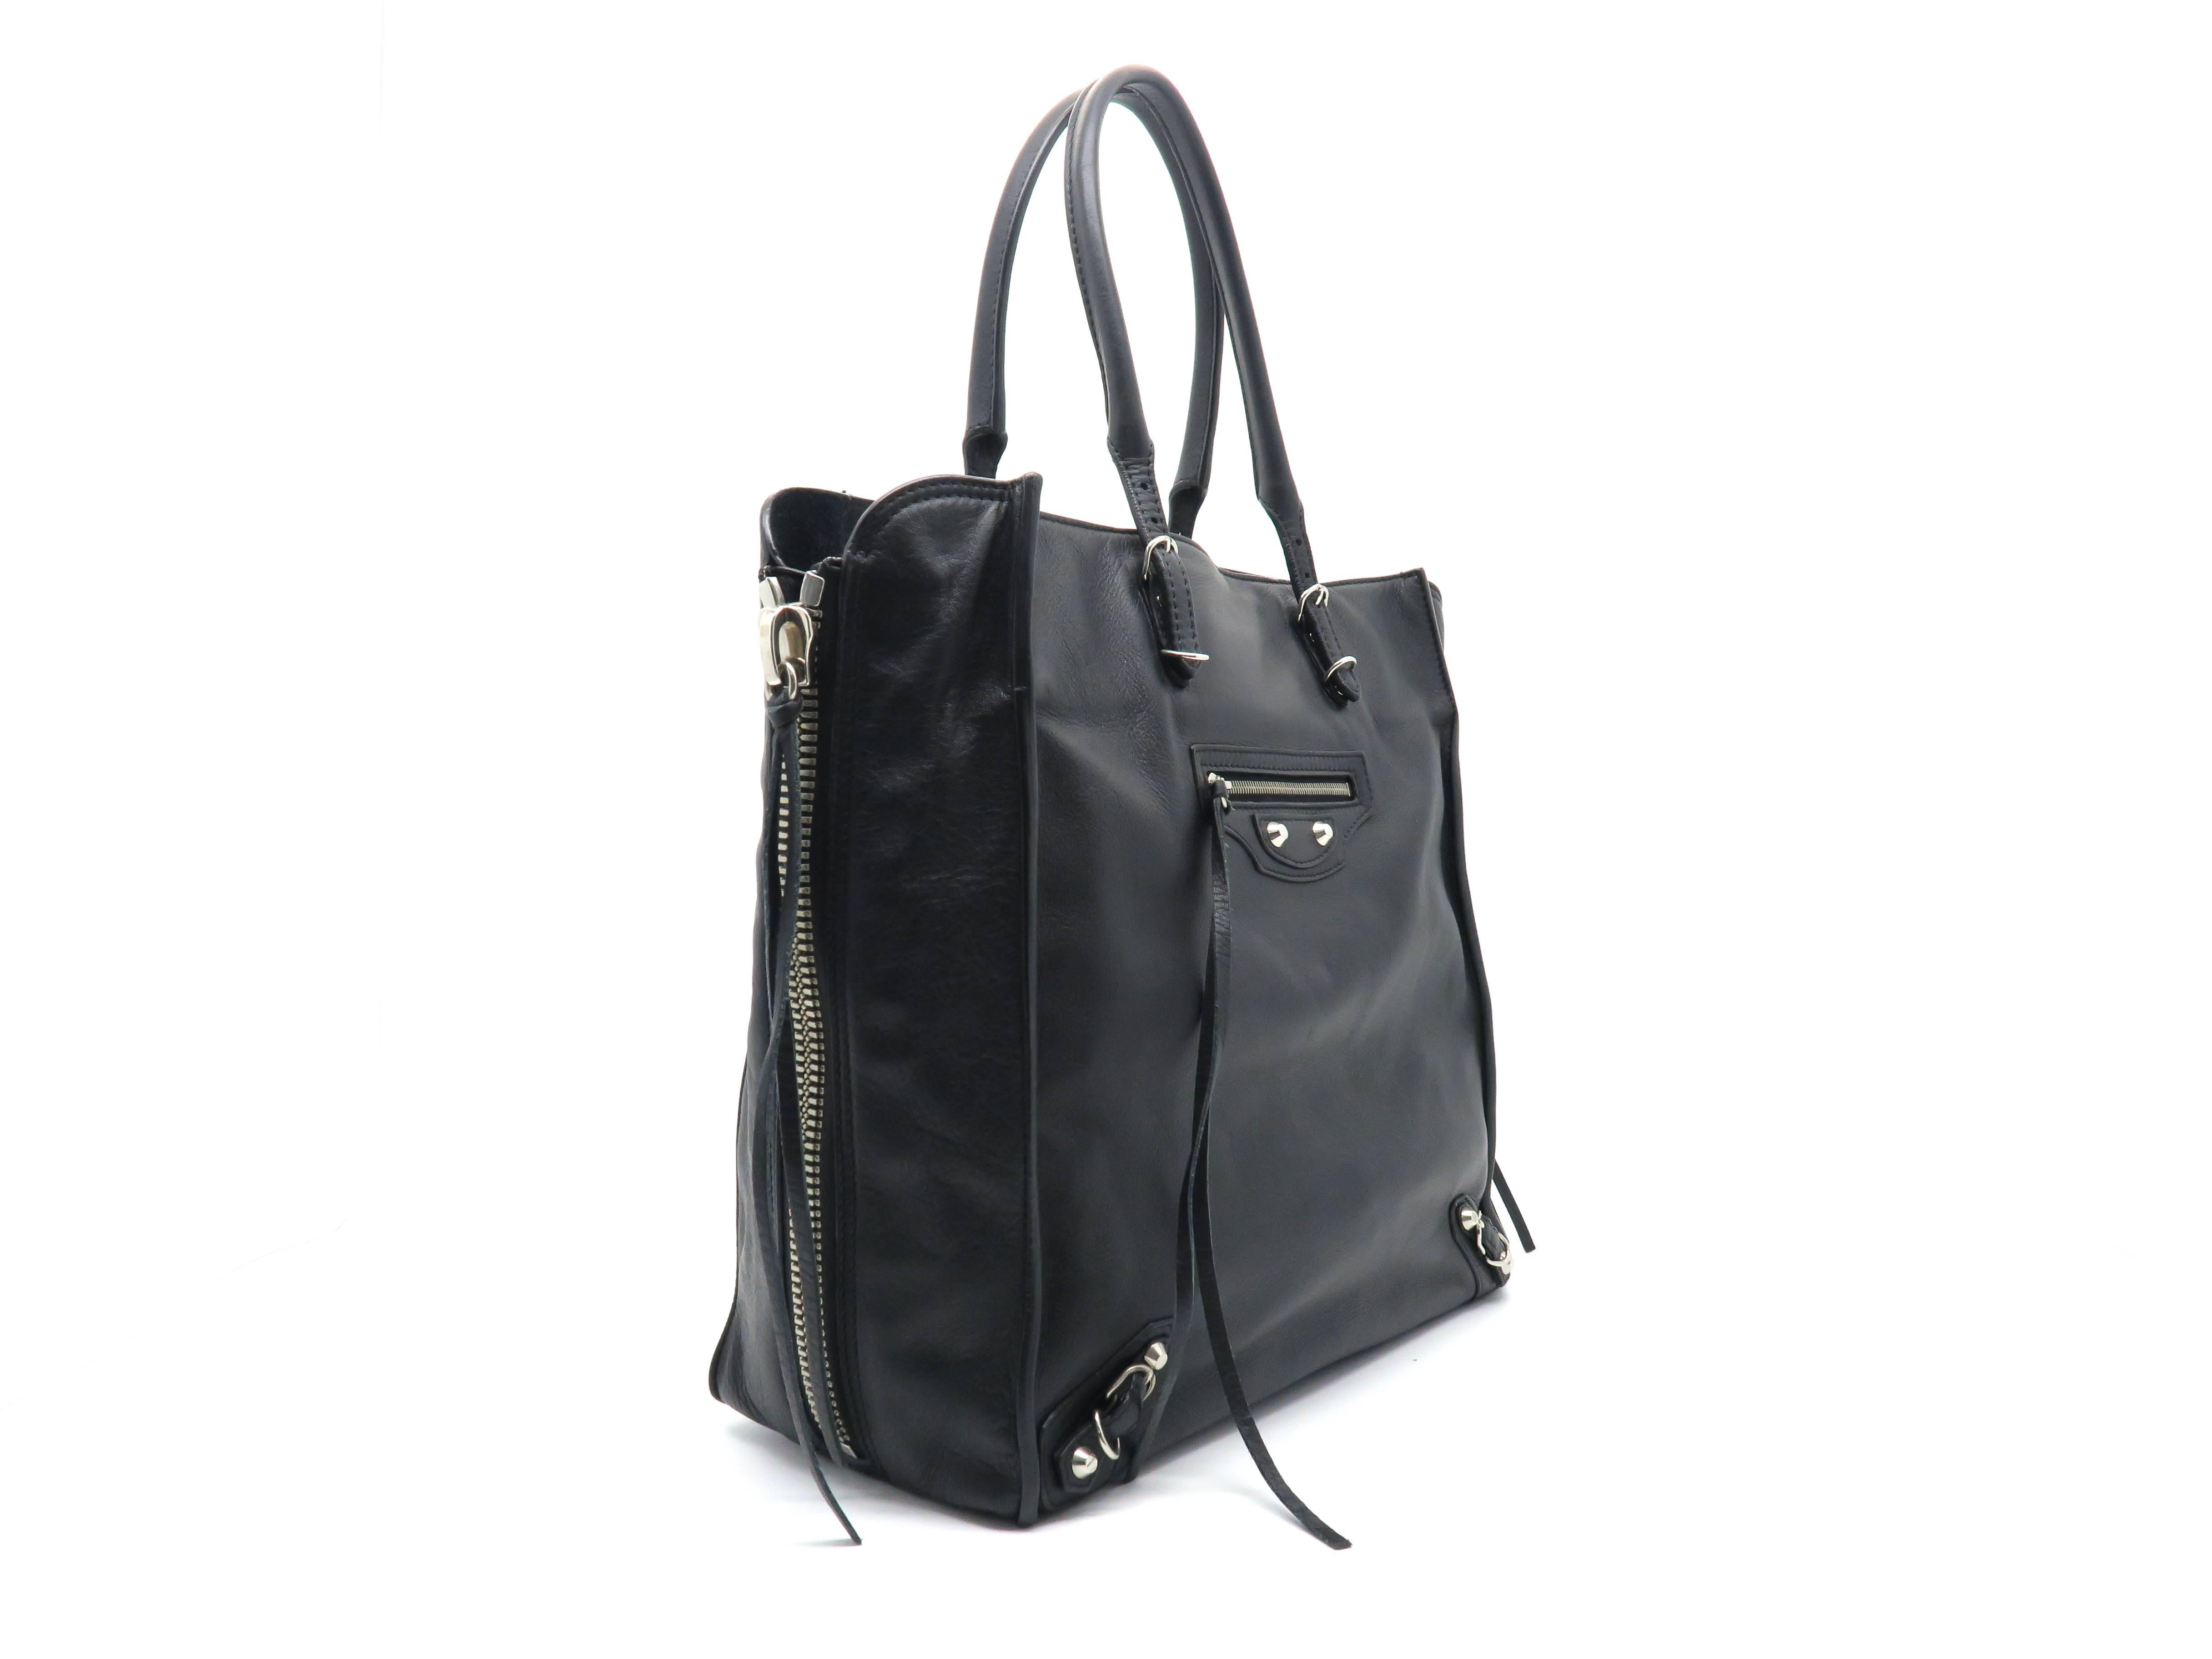 Color: Black

Material: Calfskin Leather

Condition: Rank A
Overall: Good, few minor defects
Surface:Good
Corners:Good
Edges:Good
Handles/Straps:Good
Hardware:Minor Scratches 

Dimensions: W29 × H29 × D14cm（W11.4" × H11.4" ×